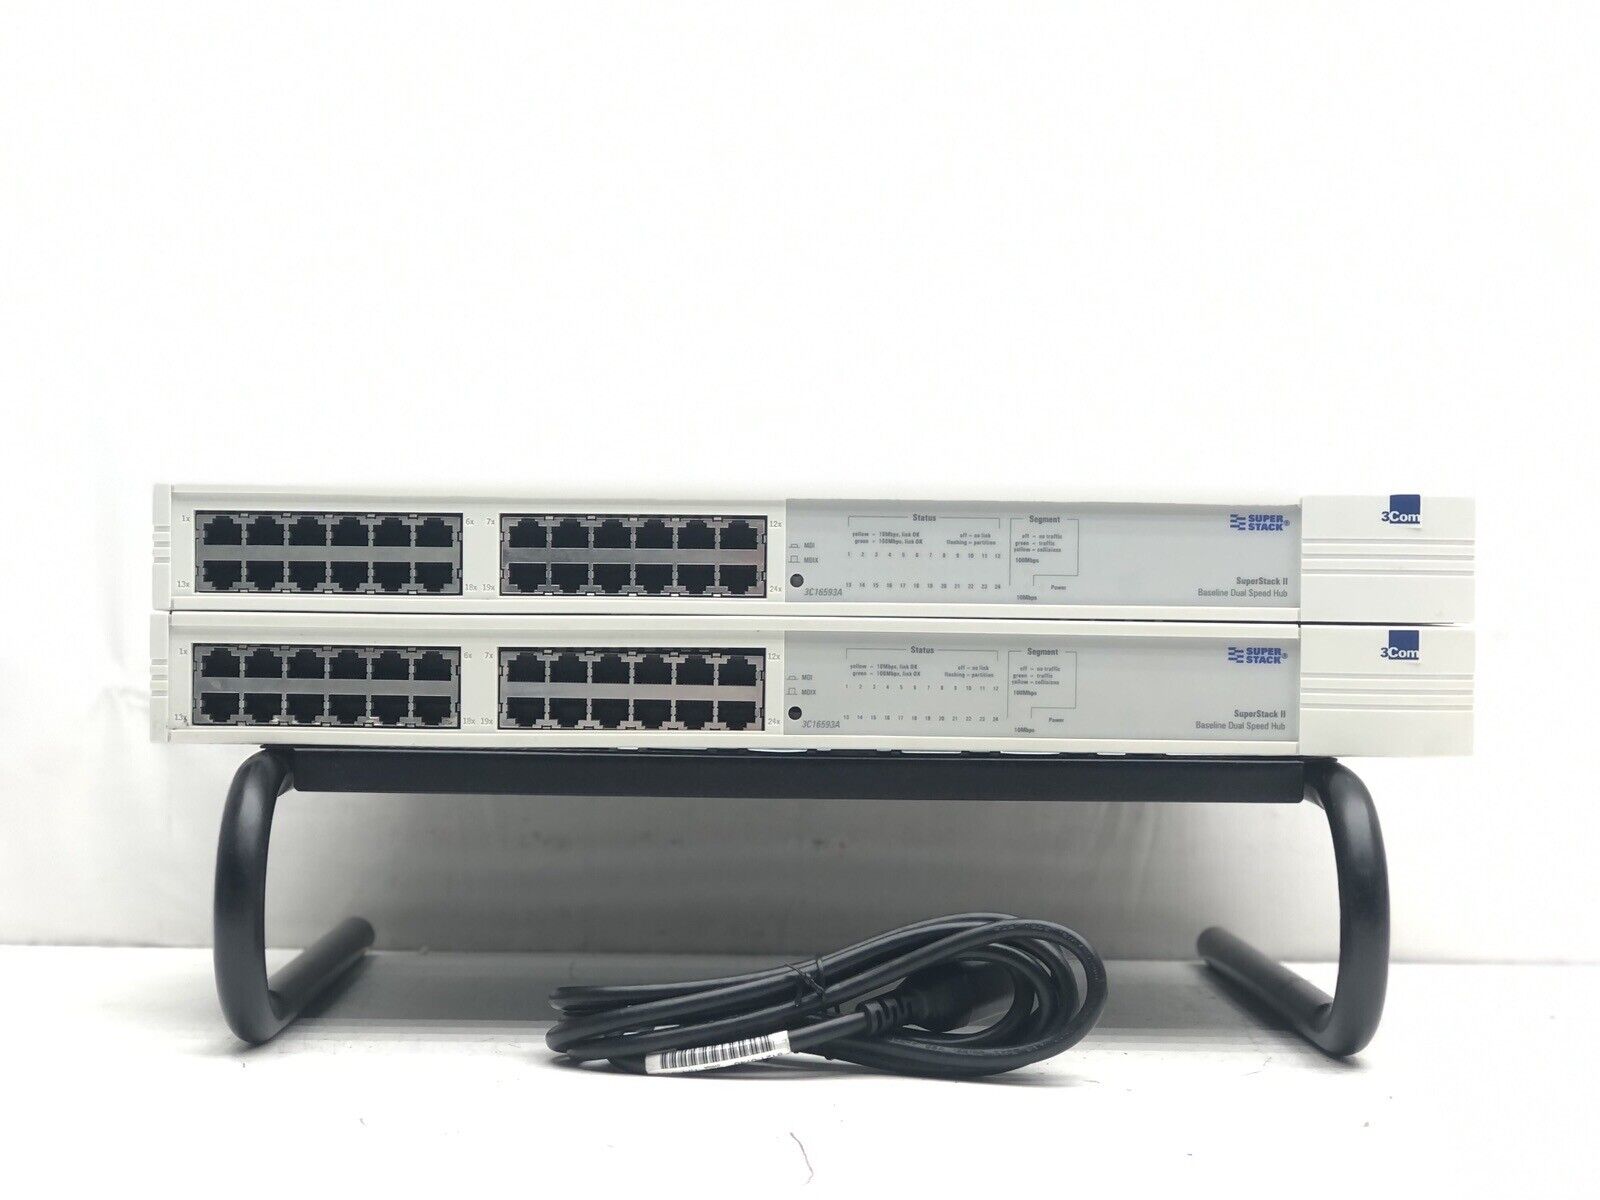 Lot of 2 3Com SuperStack II 3C16593A 24 Port Network Switch